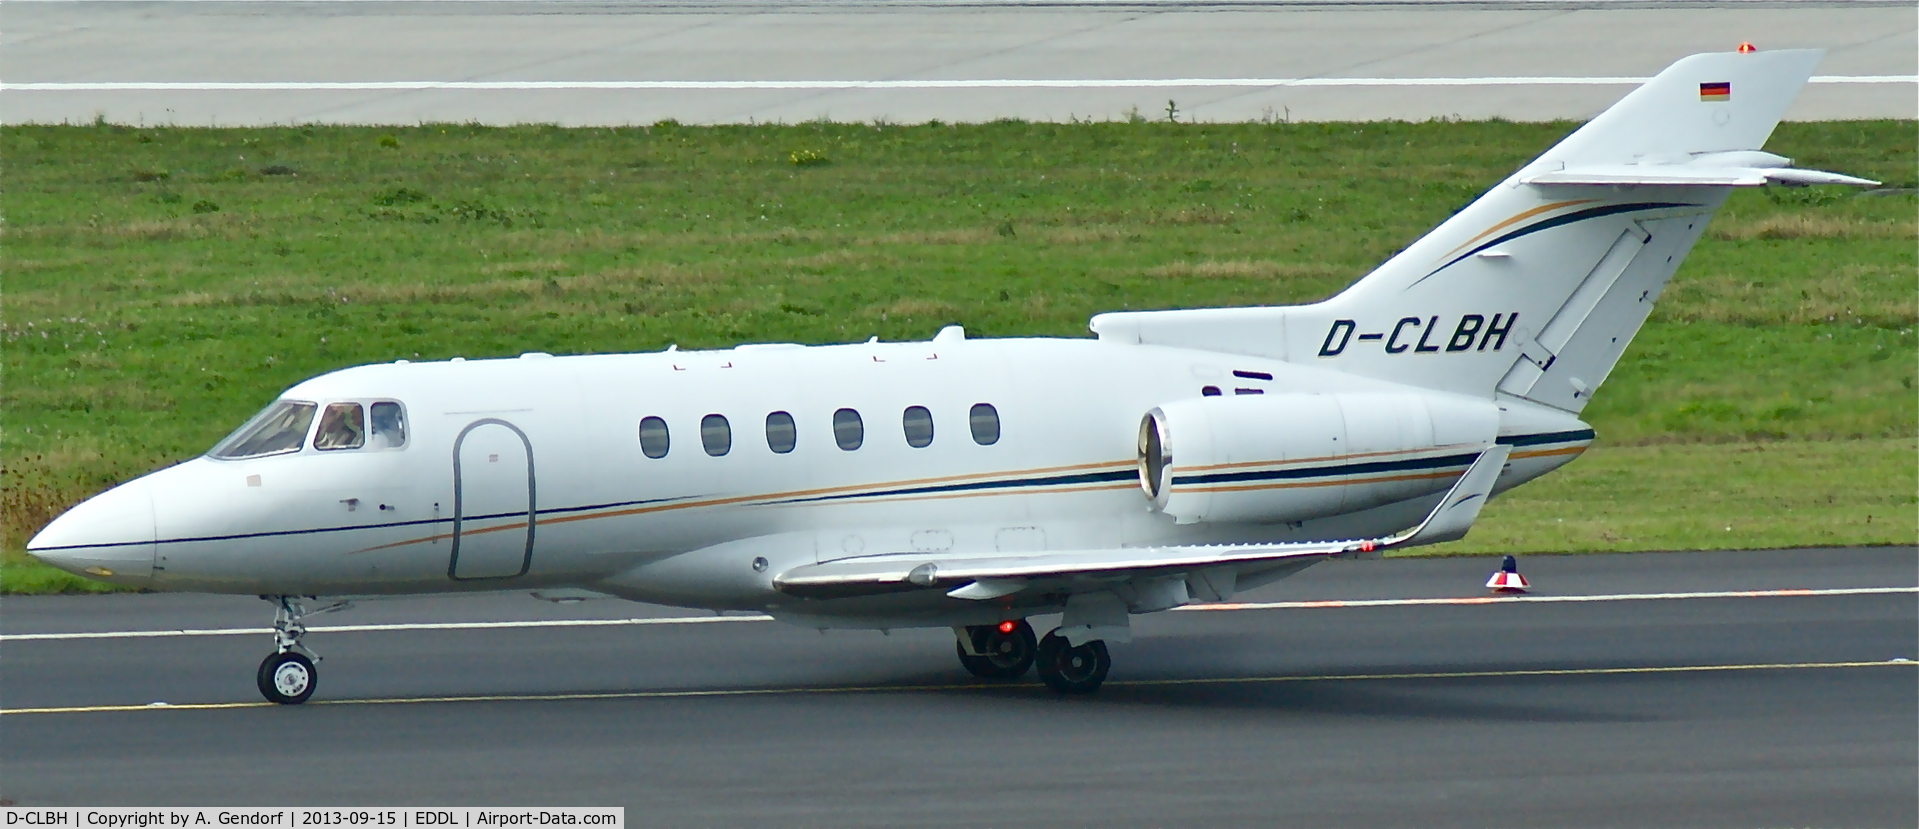 D-CLBH, 2006 Raytheon Hawker 850XP C/N 258812, Privat (untitled), seen here taxiing at Düsseldorf Int´l(EDDL), shortly after landing